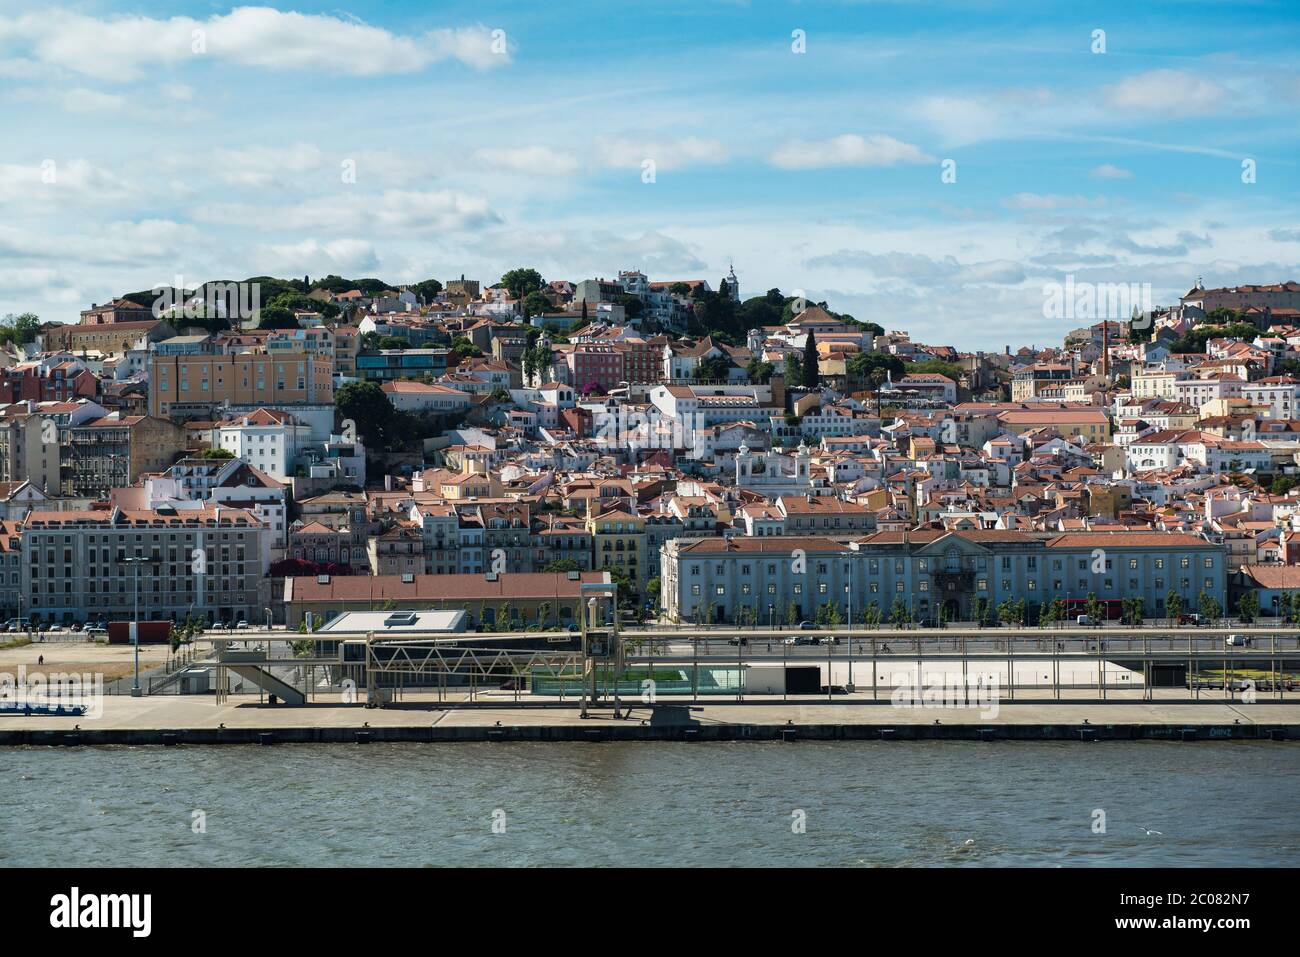 Port of Lisbon is the third largest port in Portugal, located where the  River Tagus and the Atlantic Ocean meet, Lisbon, Portugal Stock Photo -  Alamy